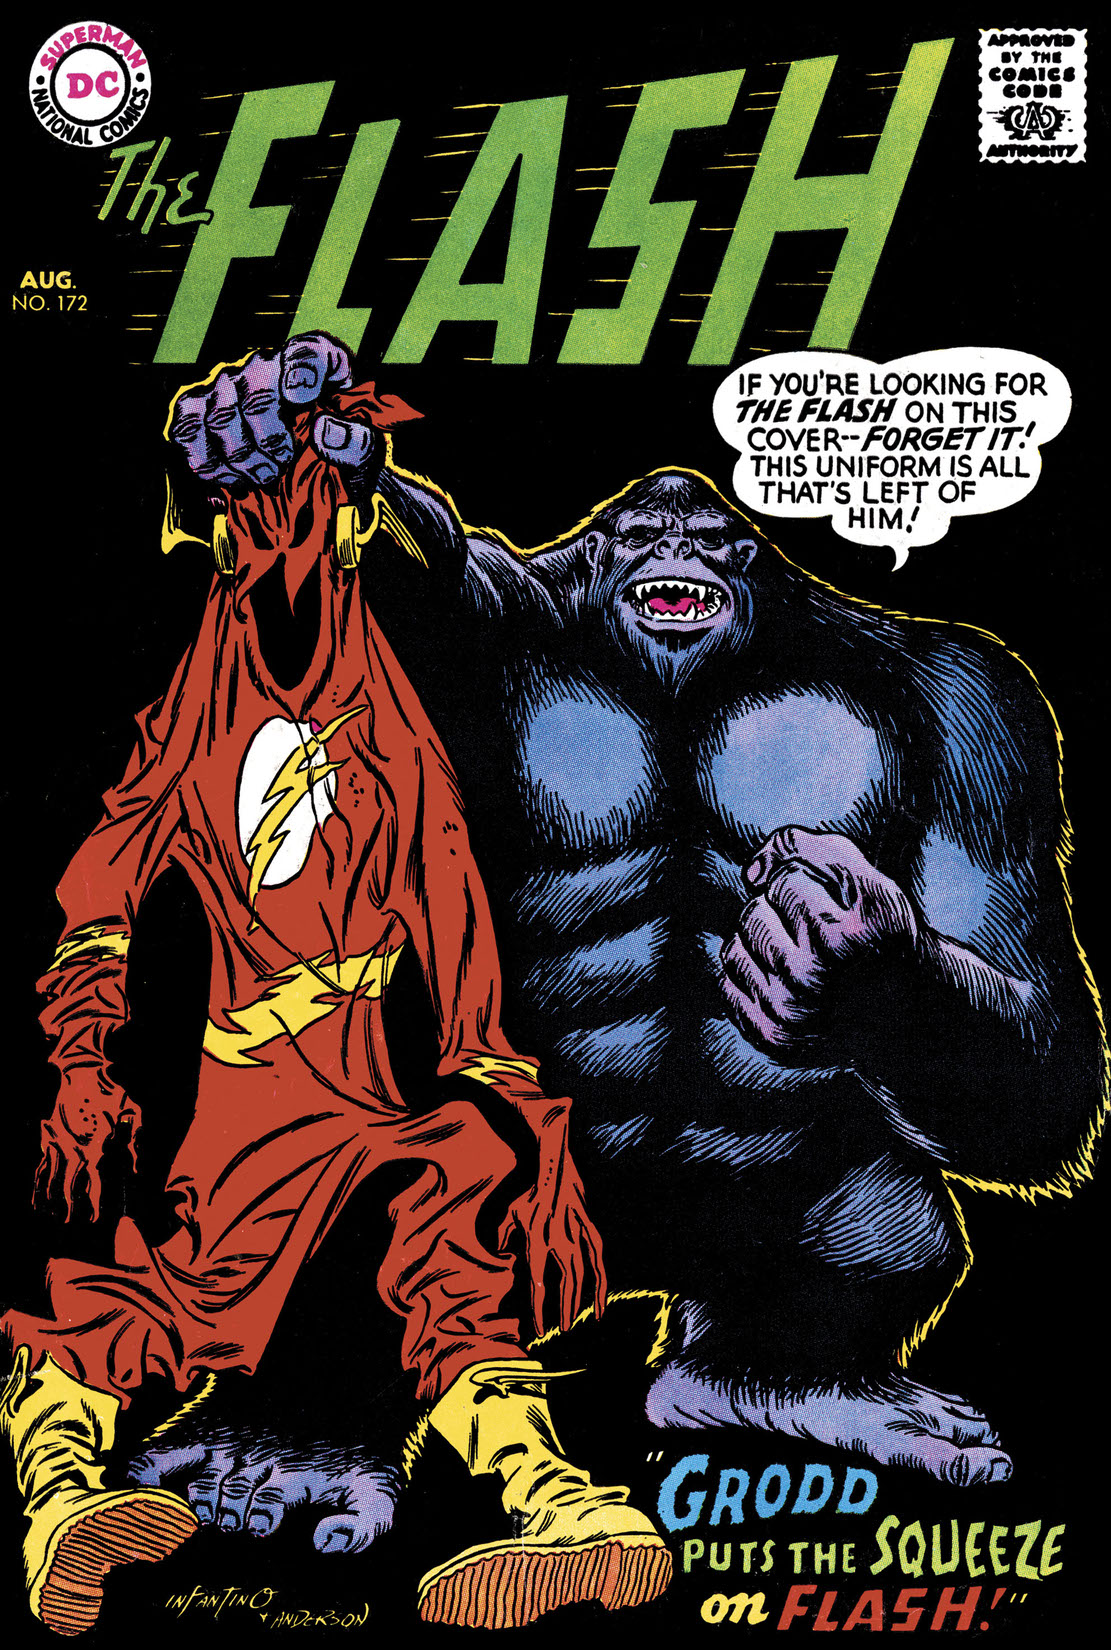 The Flash (1959-) #172 preview images